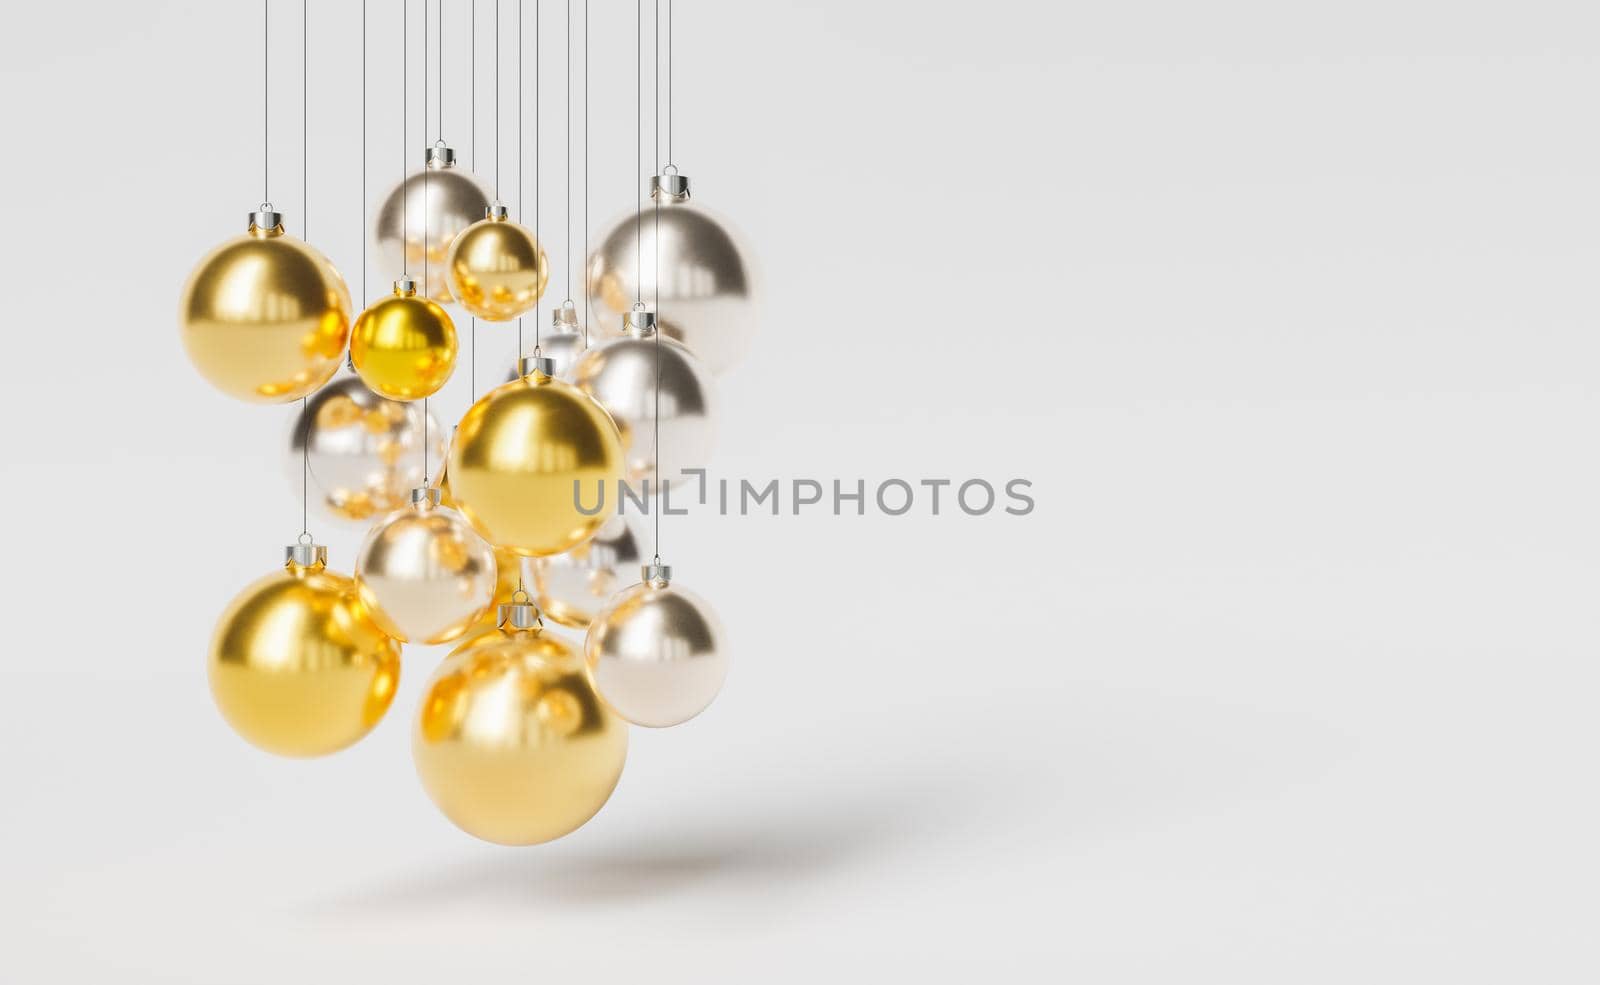 Gold and silver Christmas balls hanging with white background by asolano